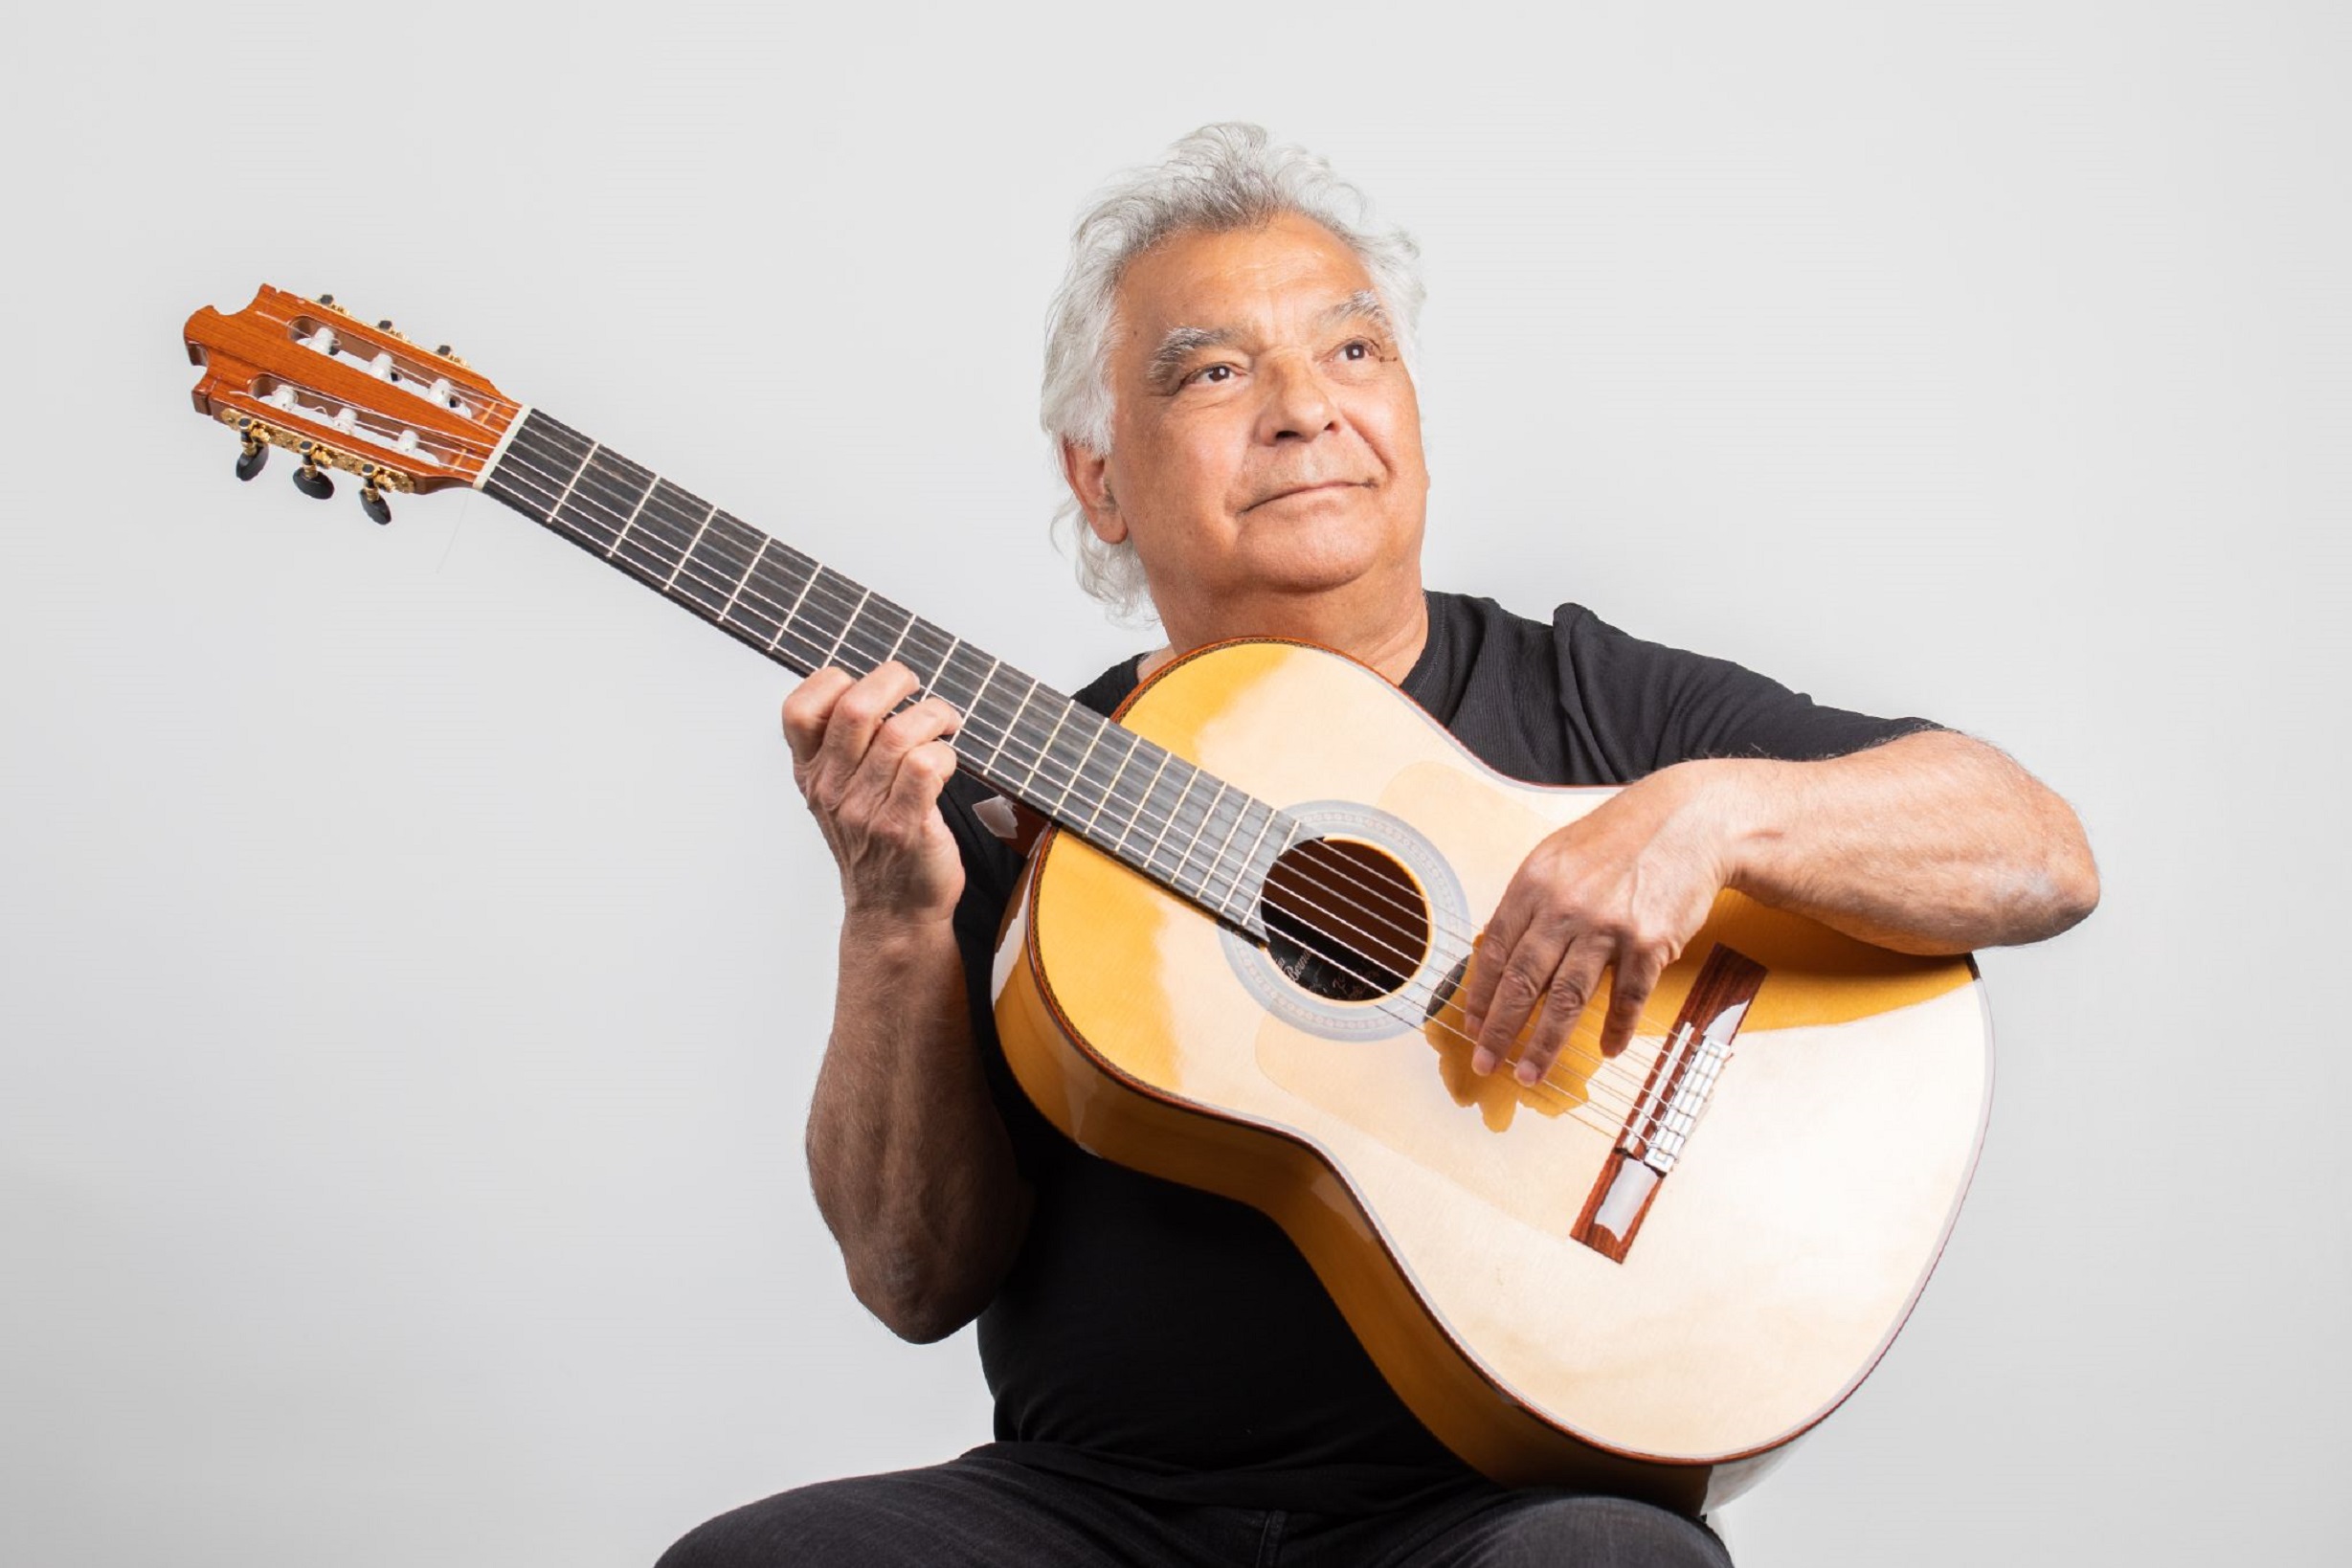 Gipsy Kings to play Chautauqua Auditorium August 31st, 2022